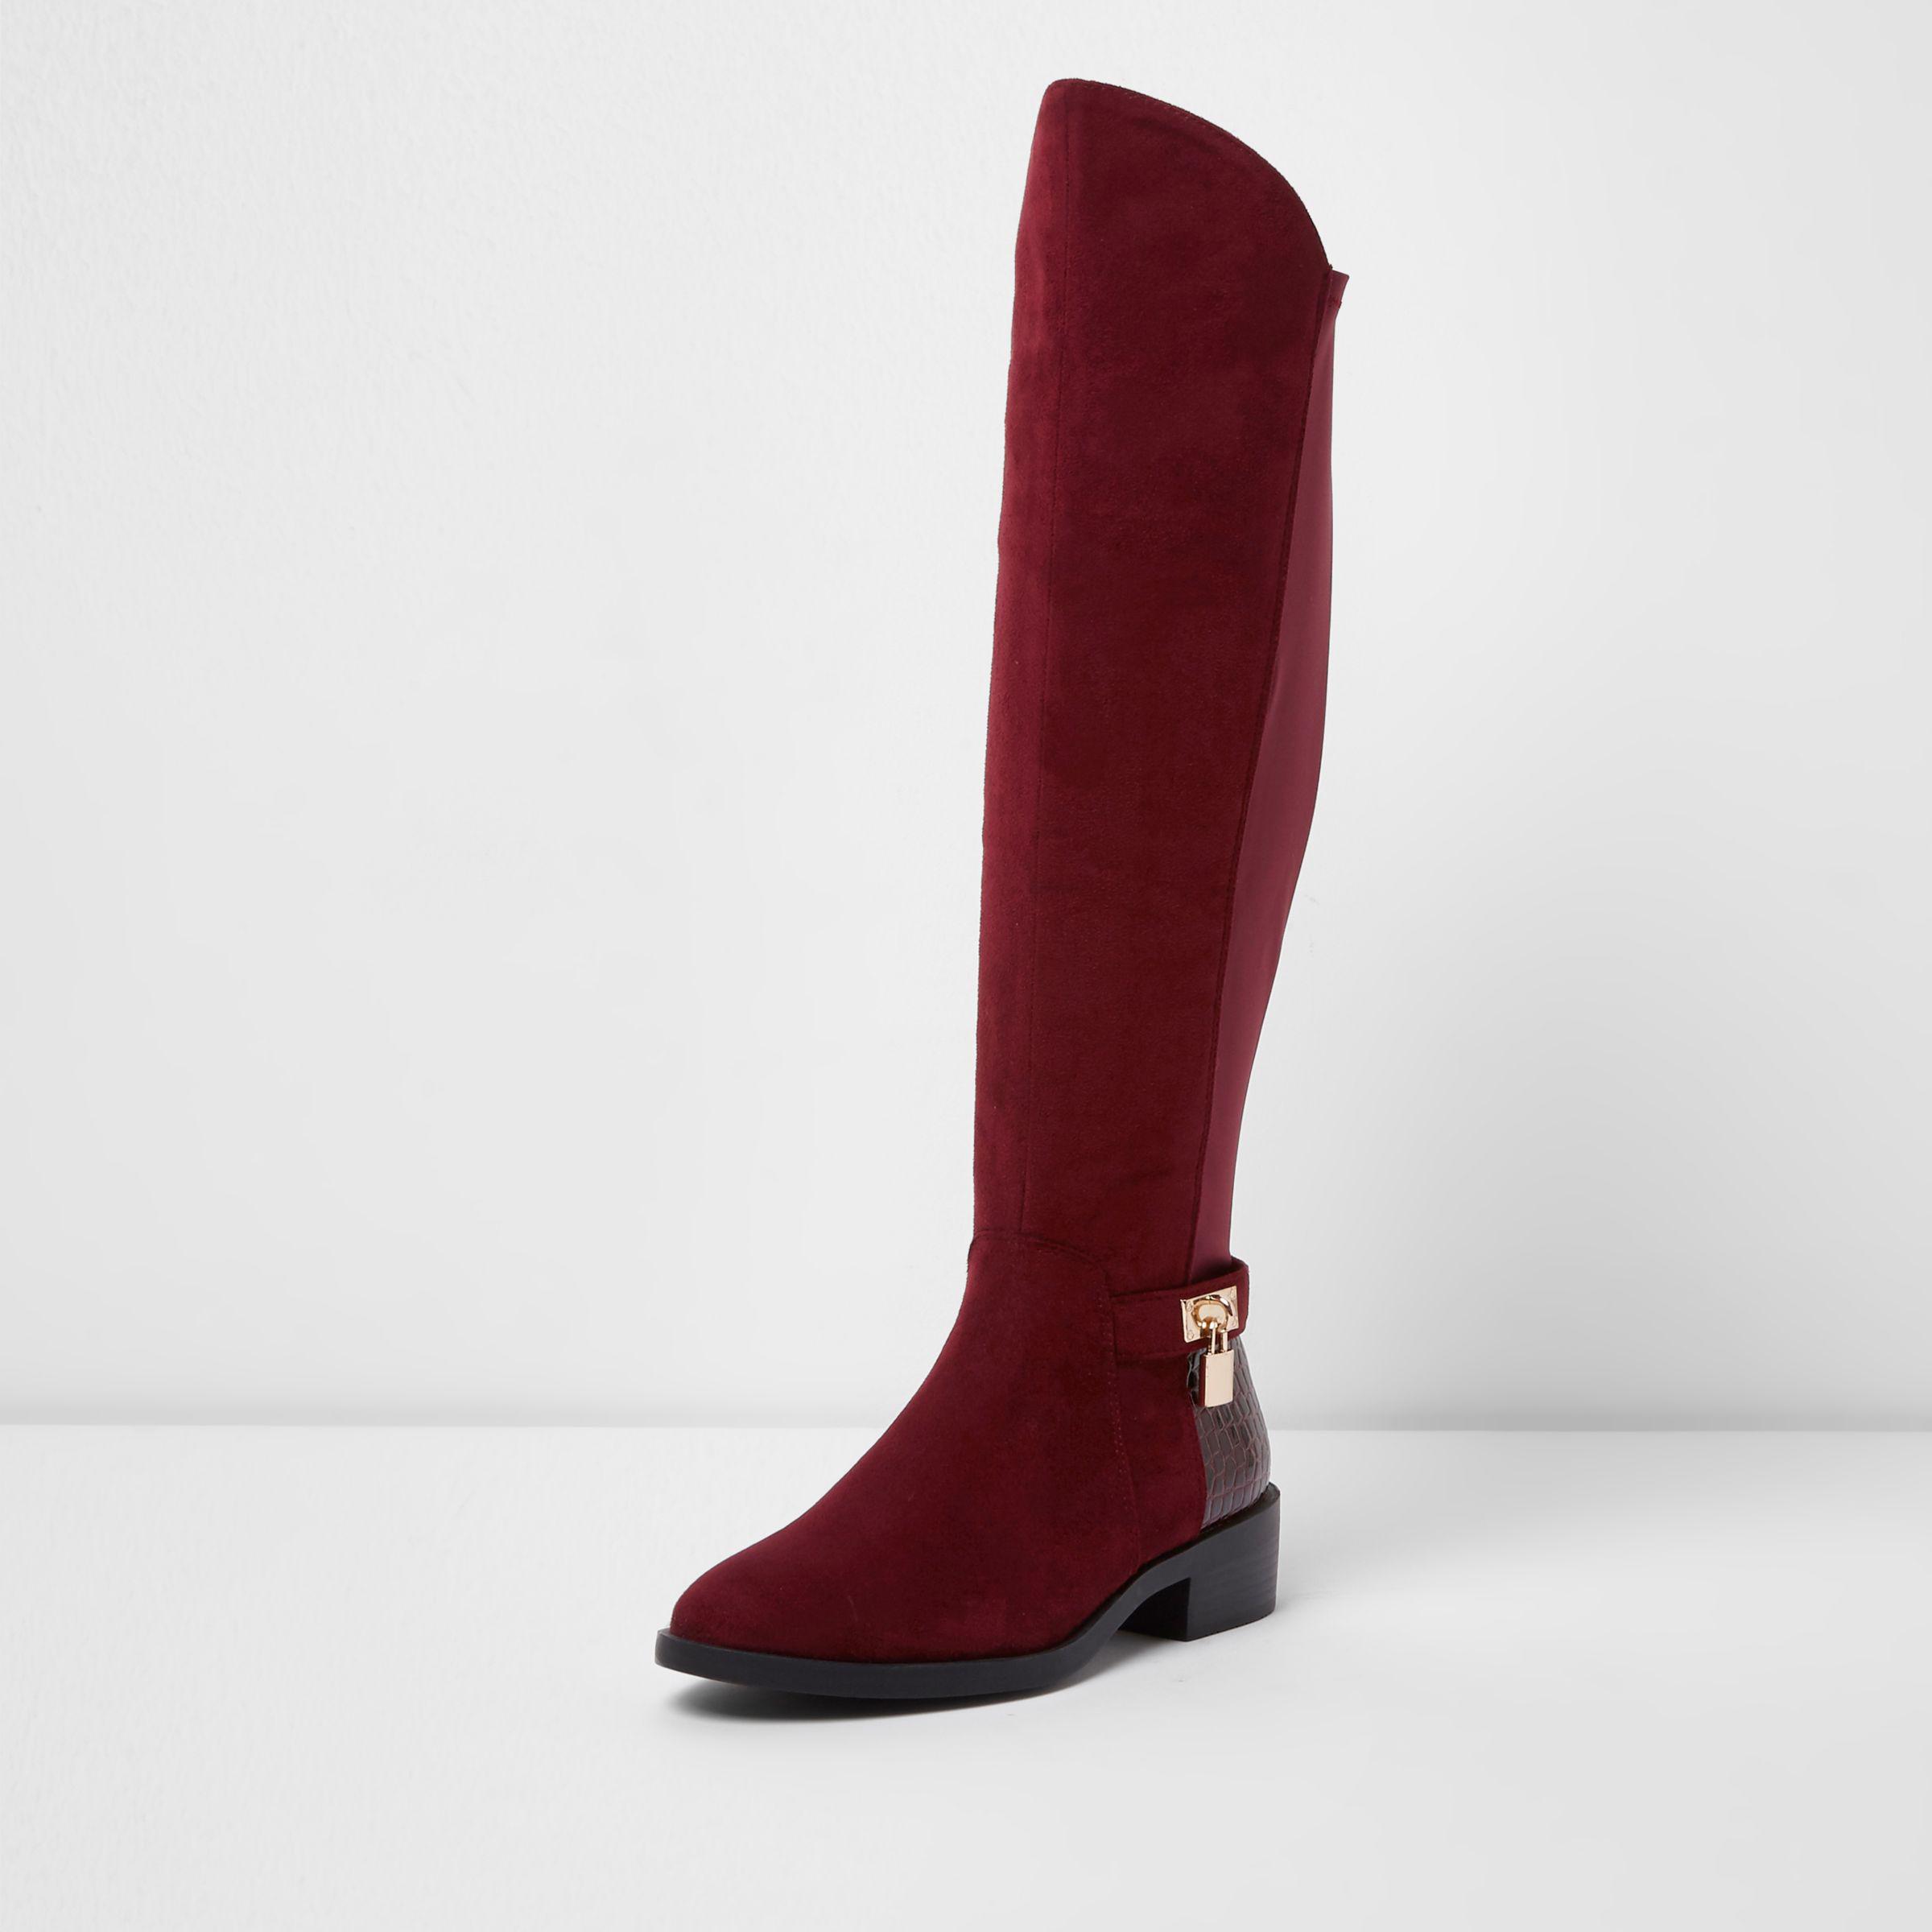 River Island Dark Red Over-the-knee 